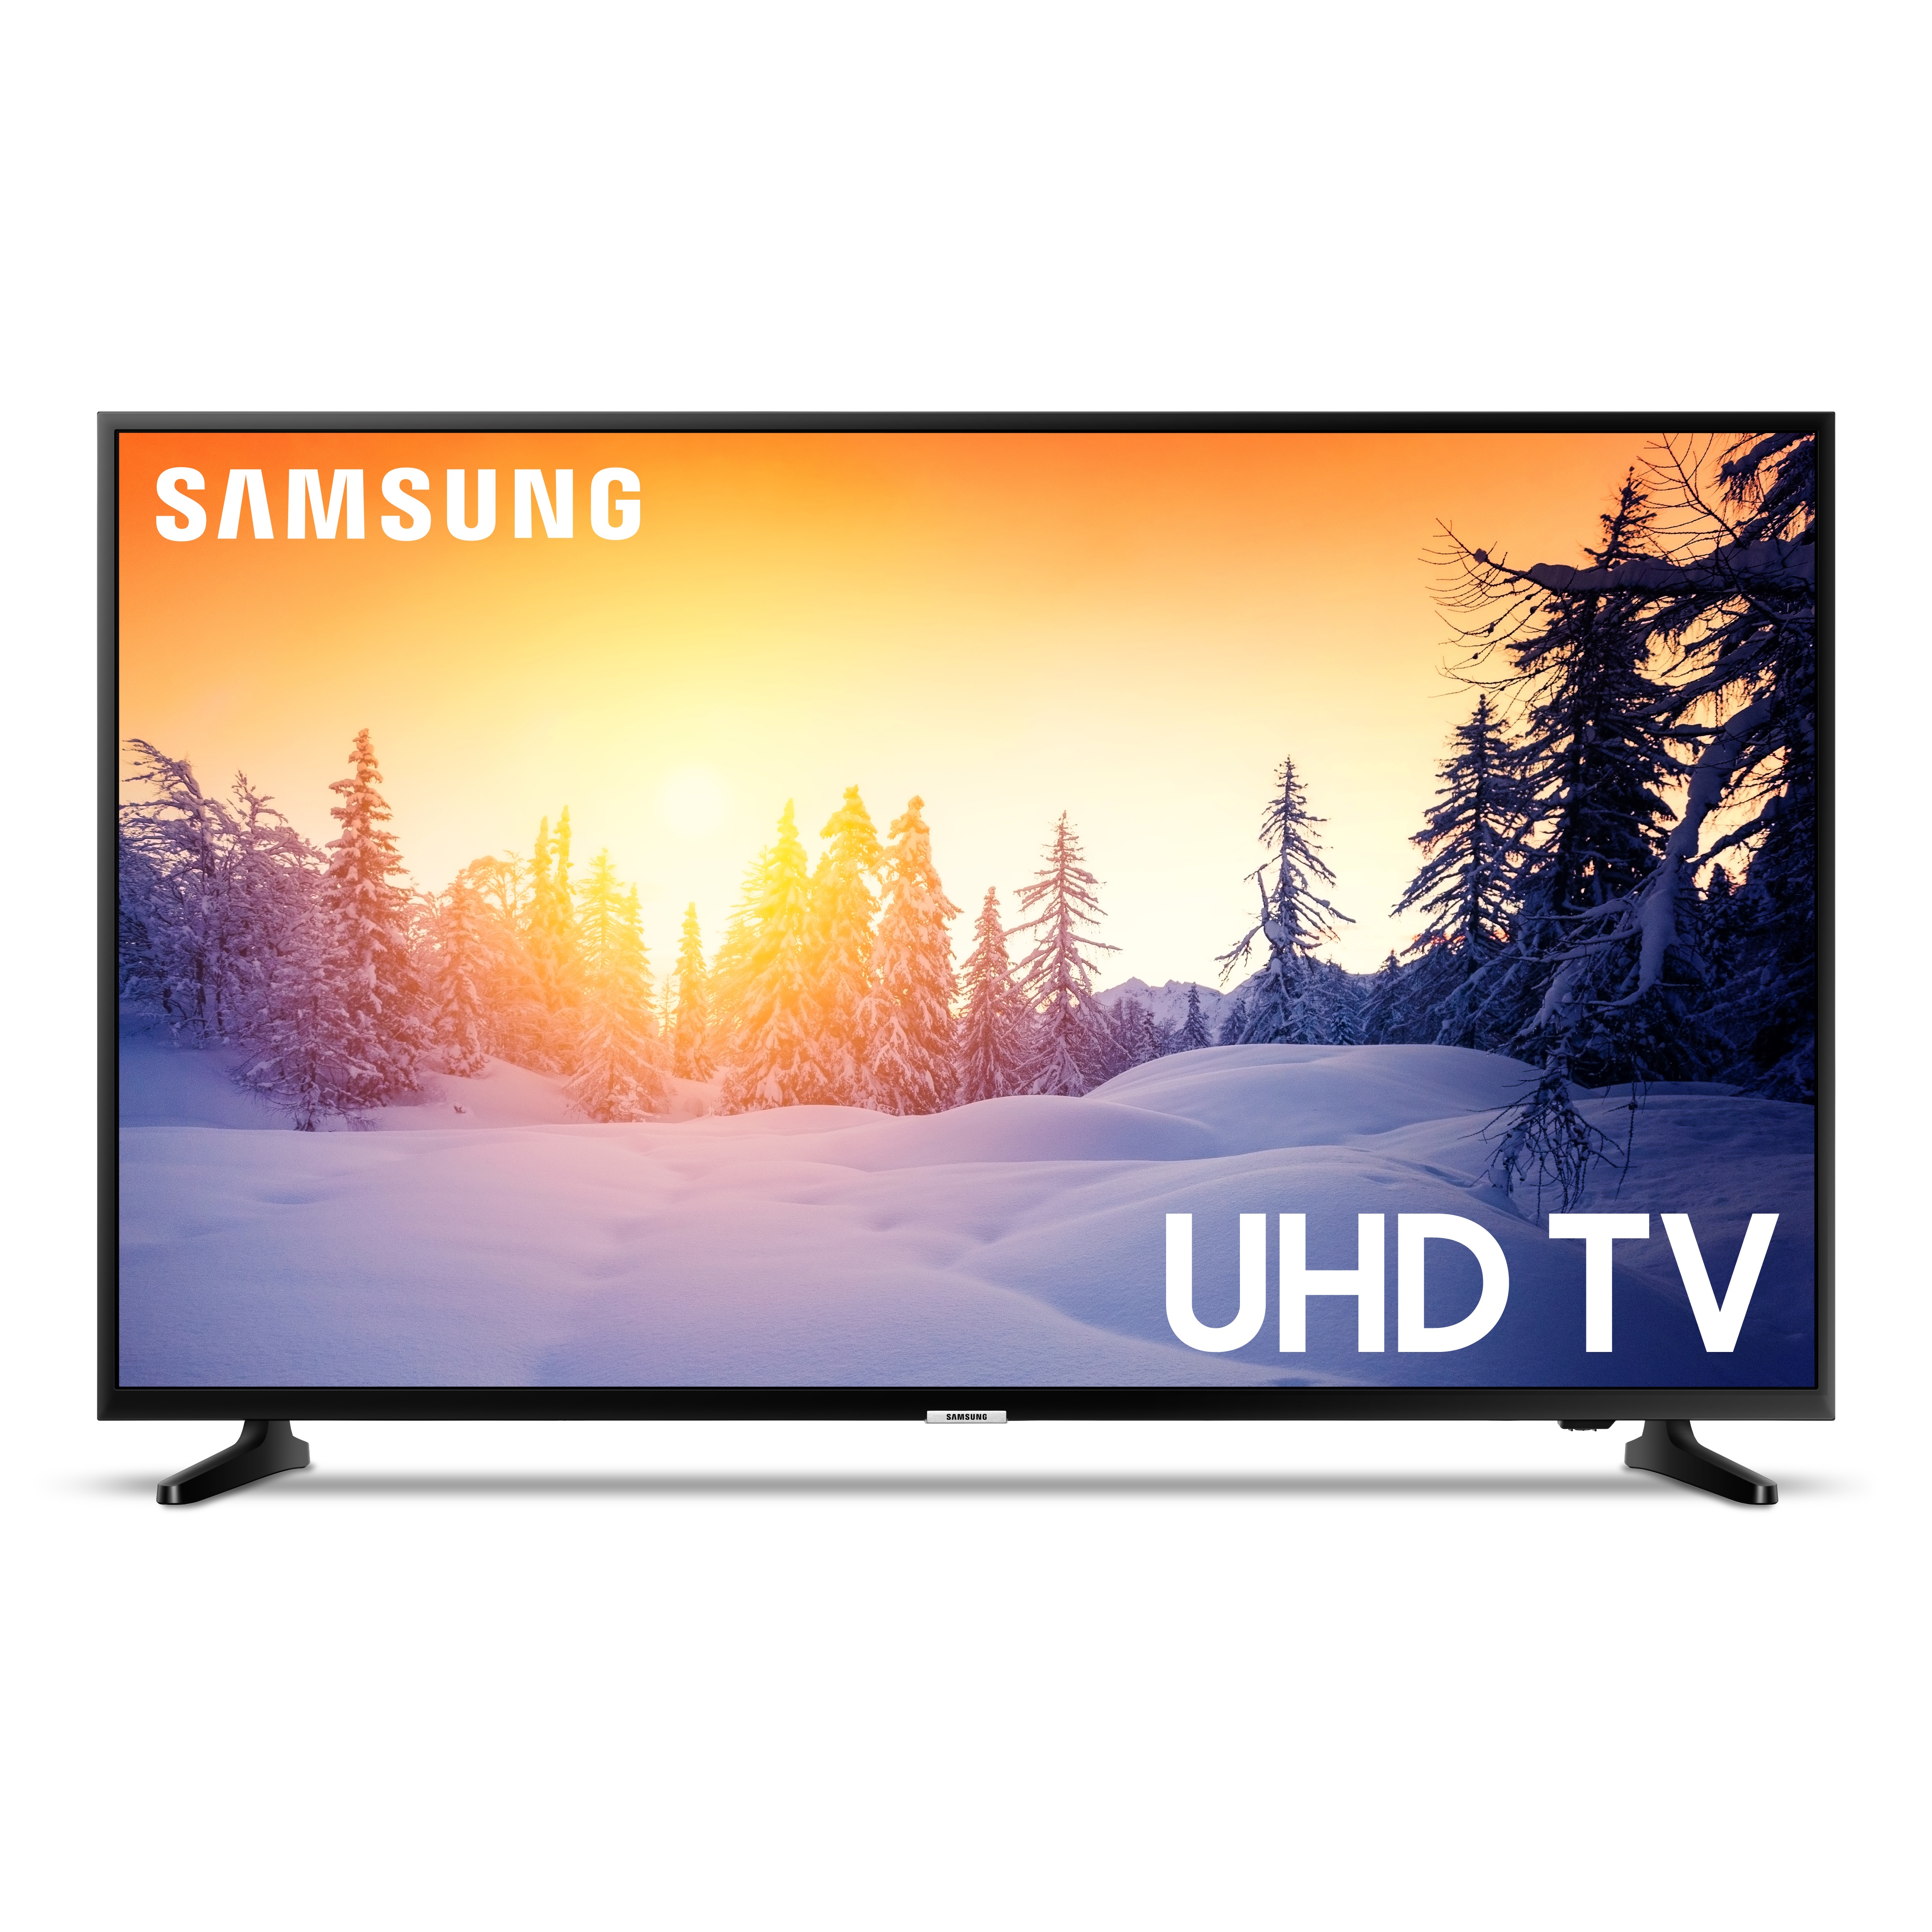 SAMSUNG 65" Class 4K UHD 2160p LED Smart TV with HDR UN65NU6900 - image 1 of 20